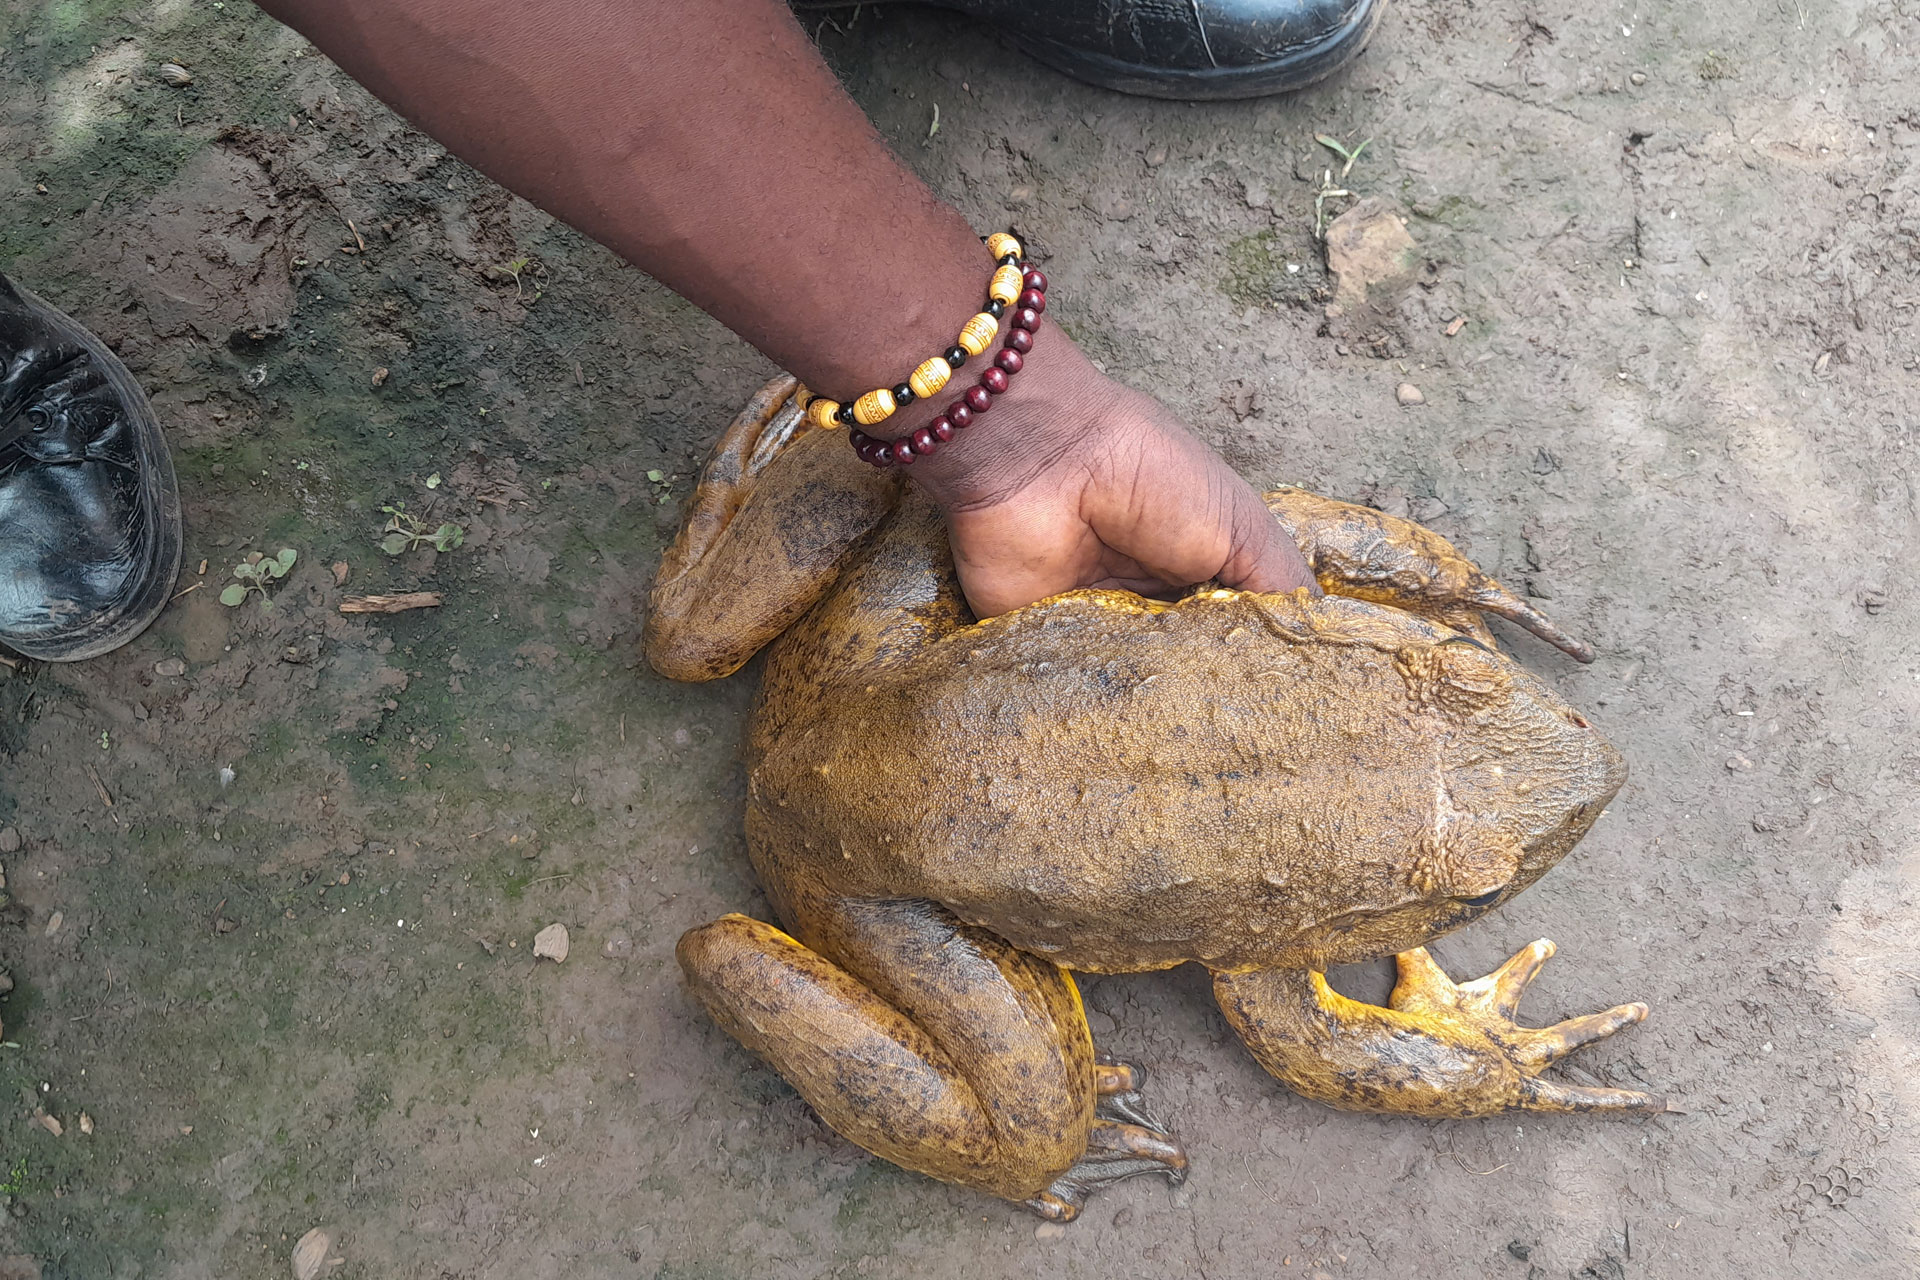 The Goliath Frog